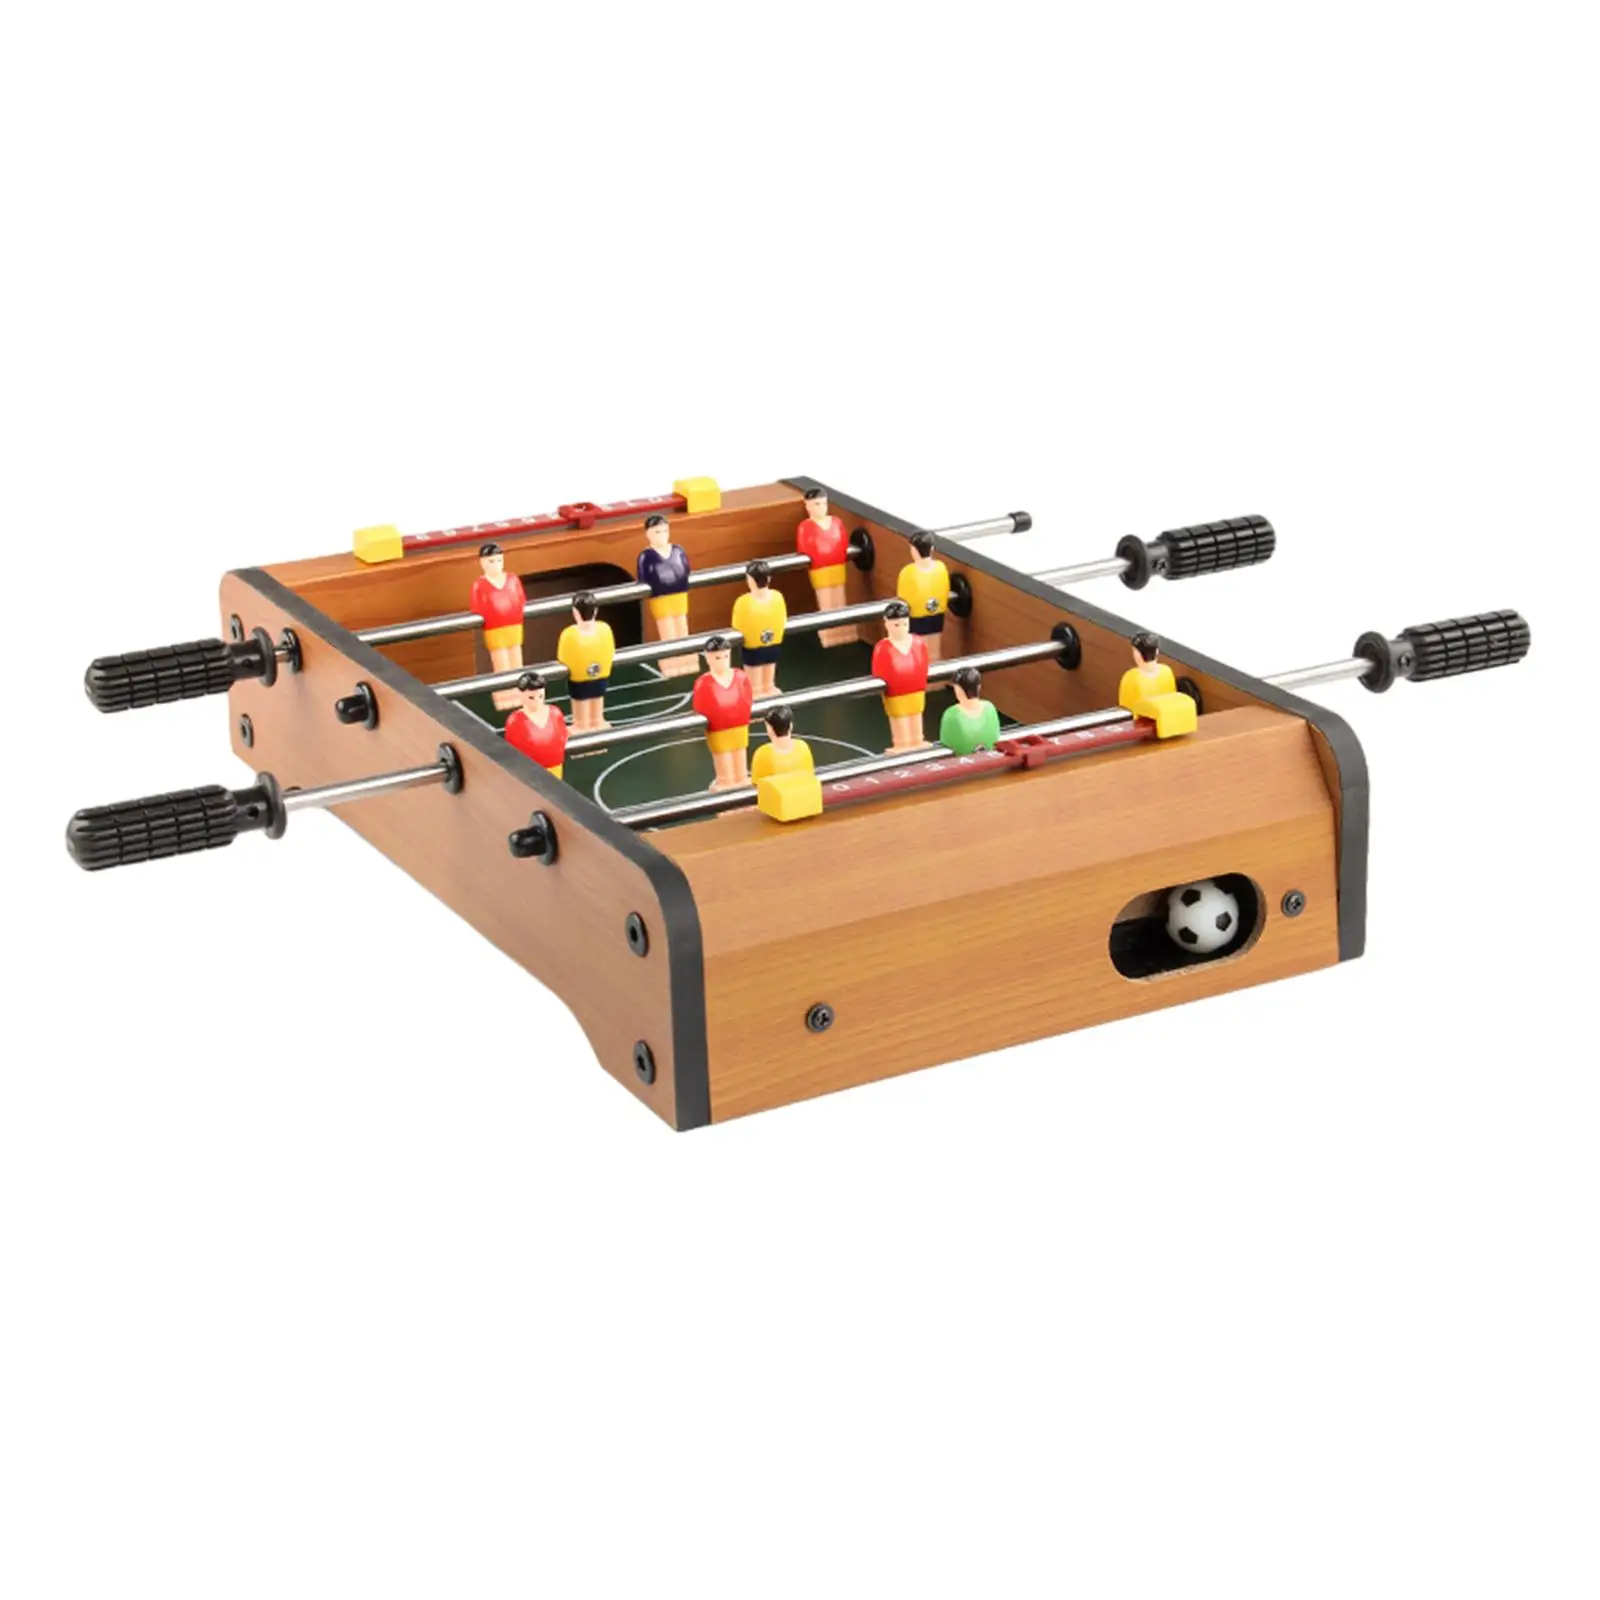 Mini Foosball Table Soccer Portable Table Top Football for Family Game Kids